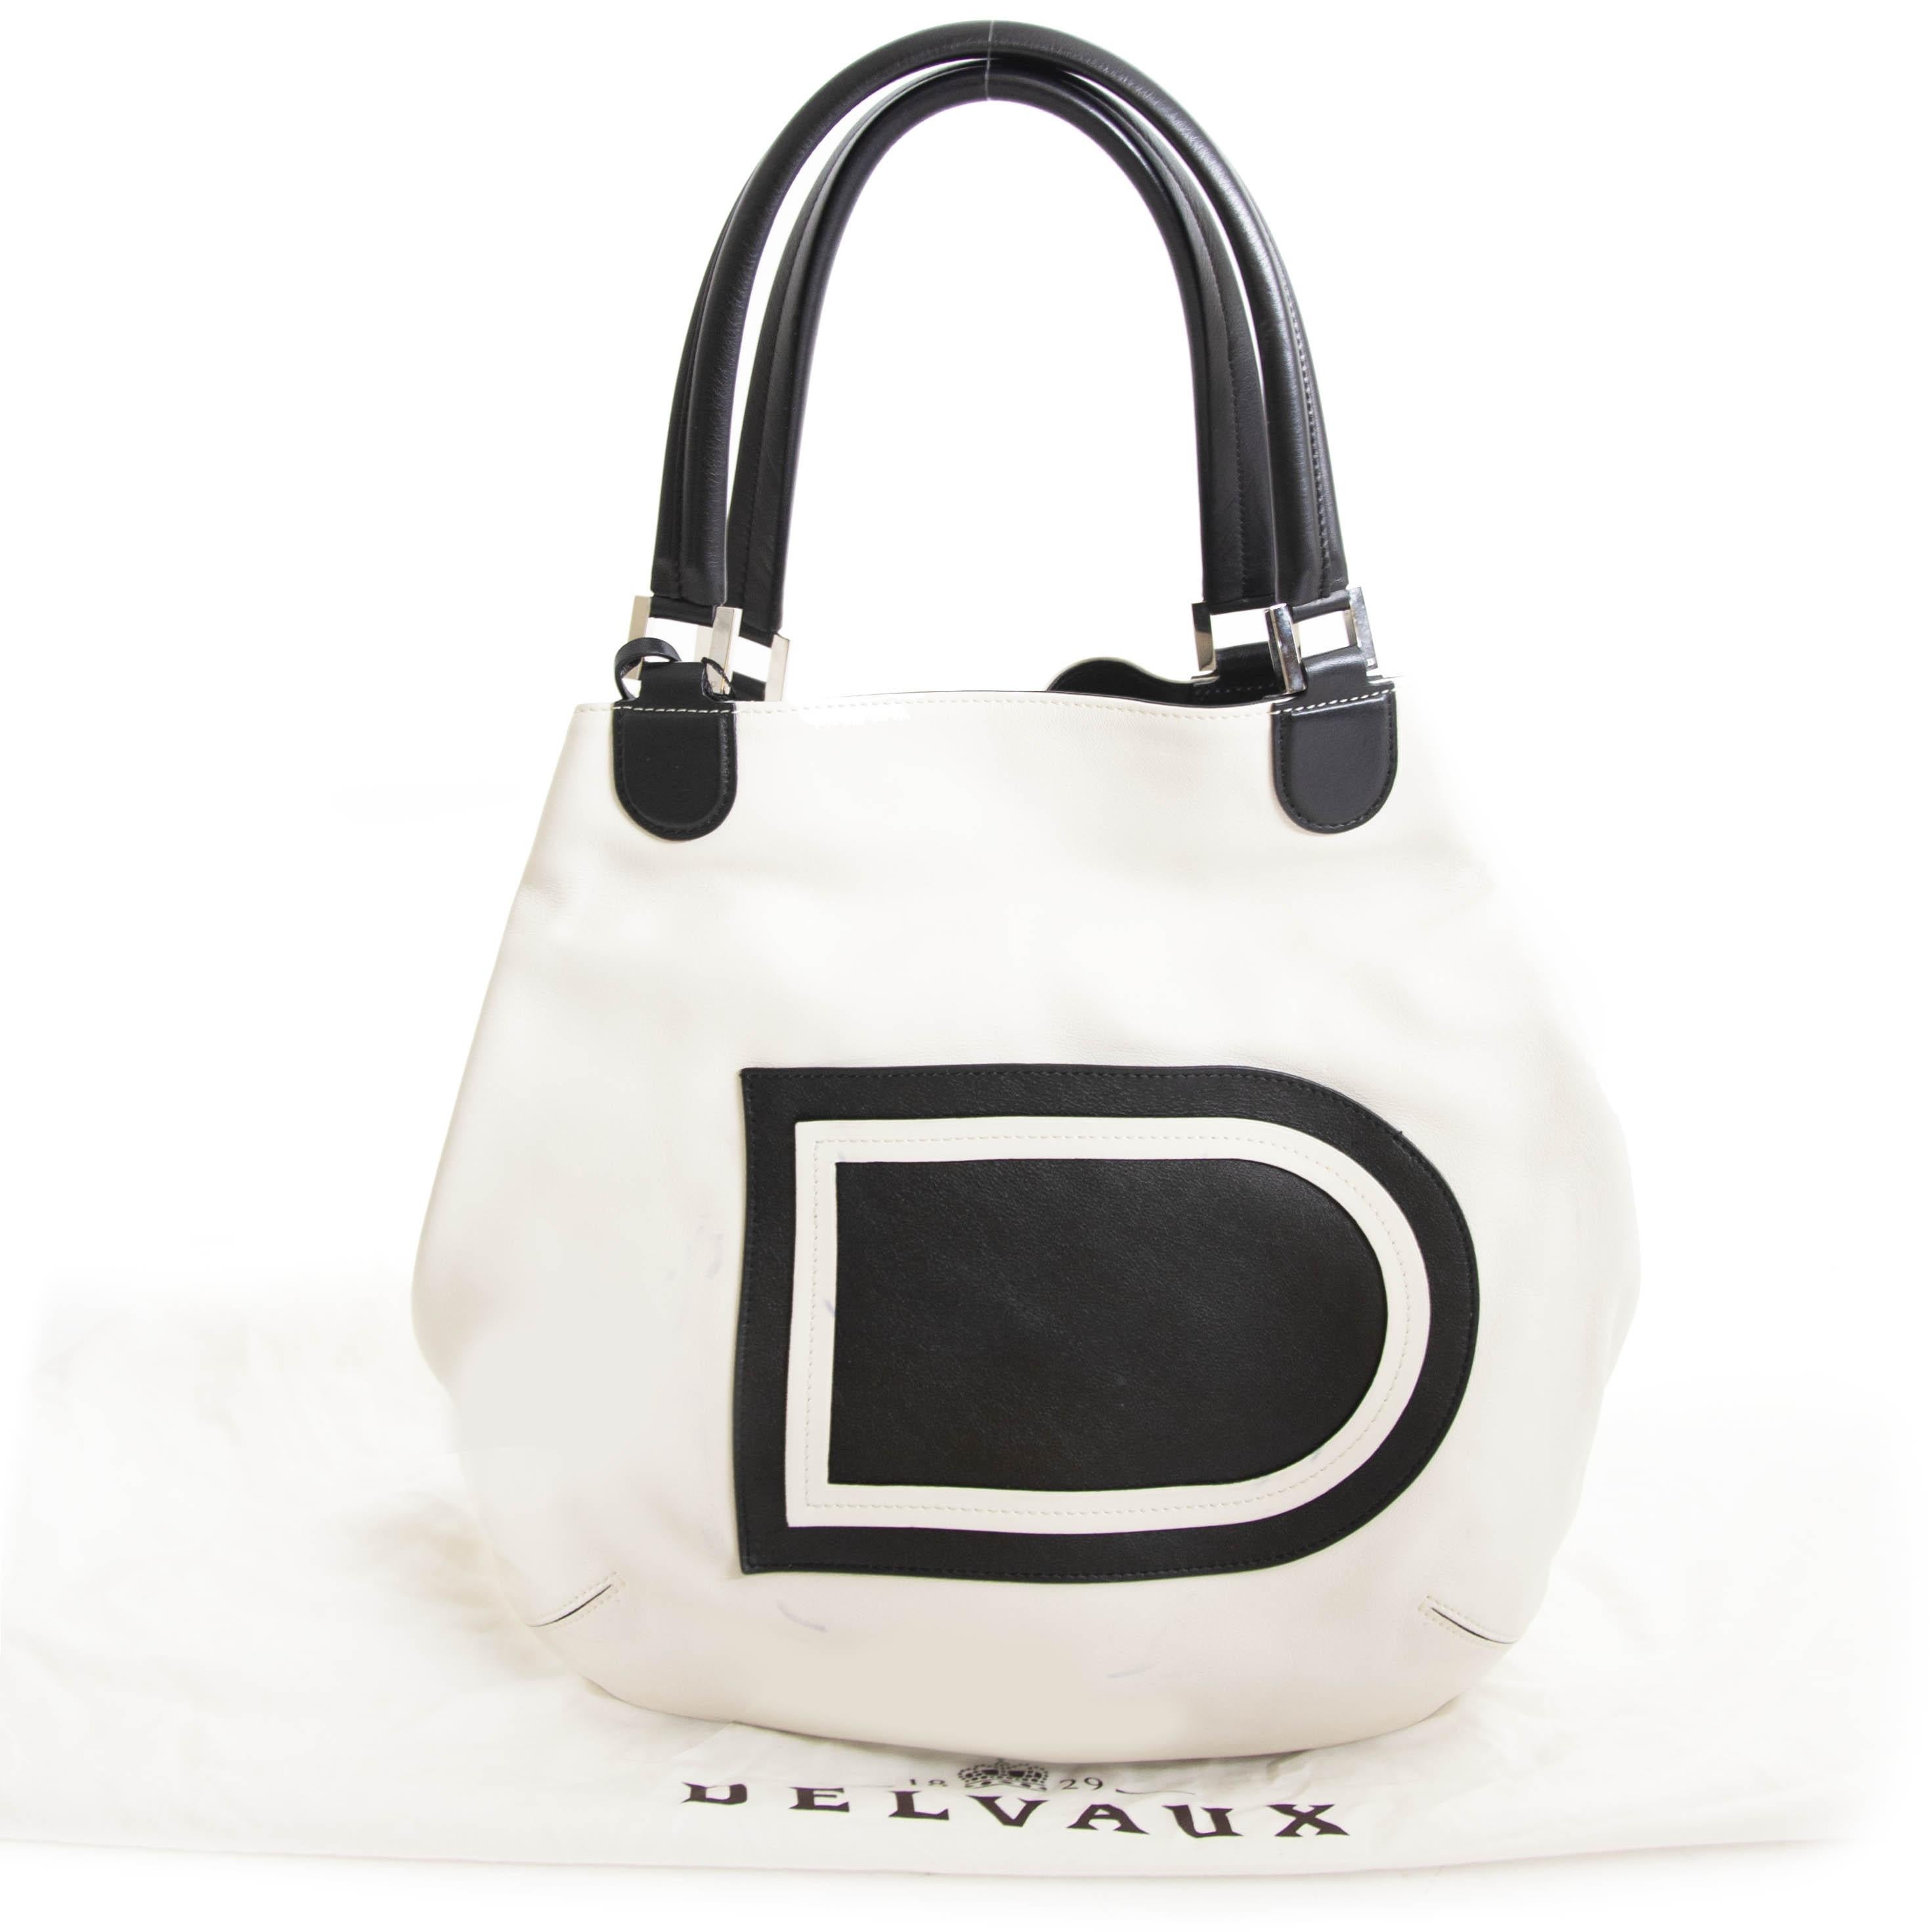 Good preloved condition

Delvaux White Louise Shoulder Bag

This beautiful Delvaux bag comes in white leather with black leather straps and the iconic 'D' logo on the front.
The interior features one extra compartment with zipper. 

Comes